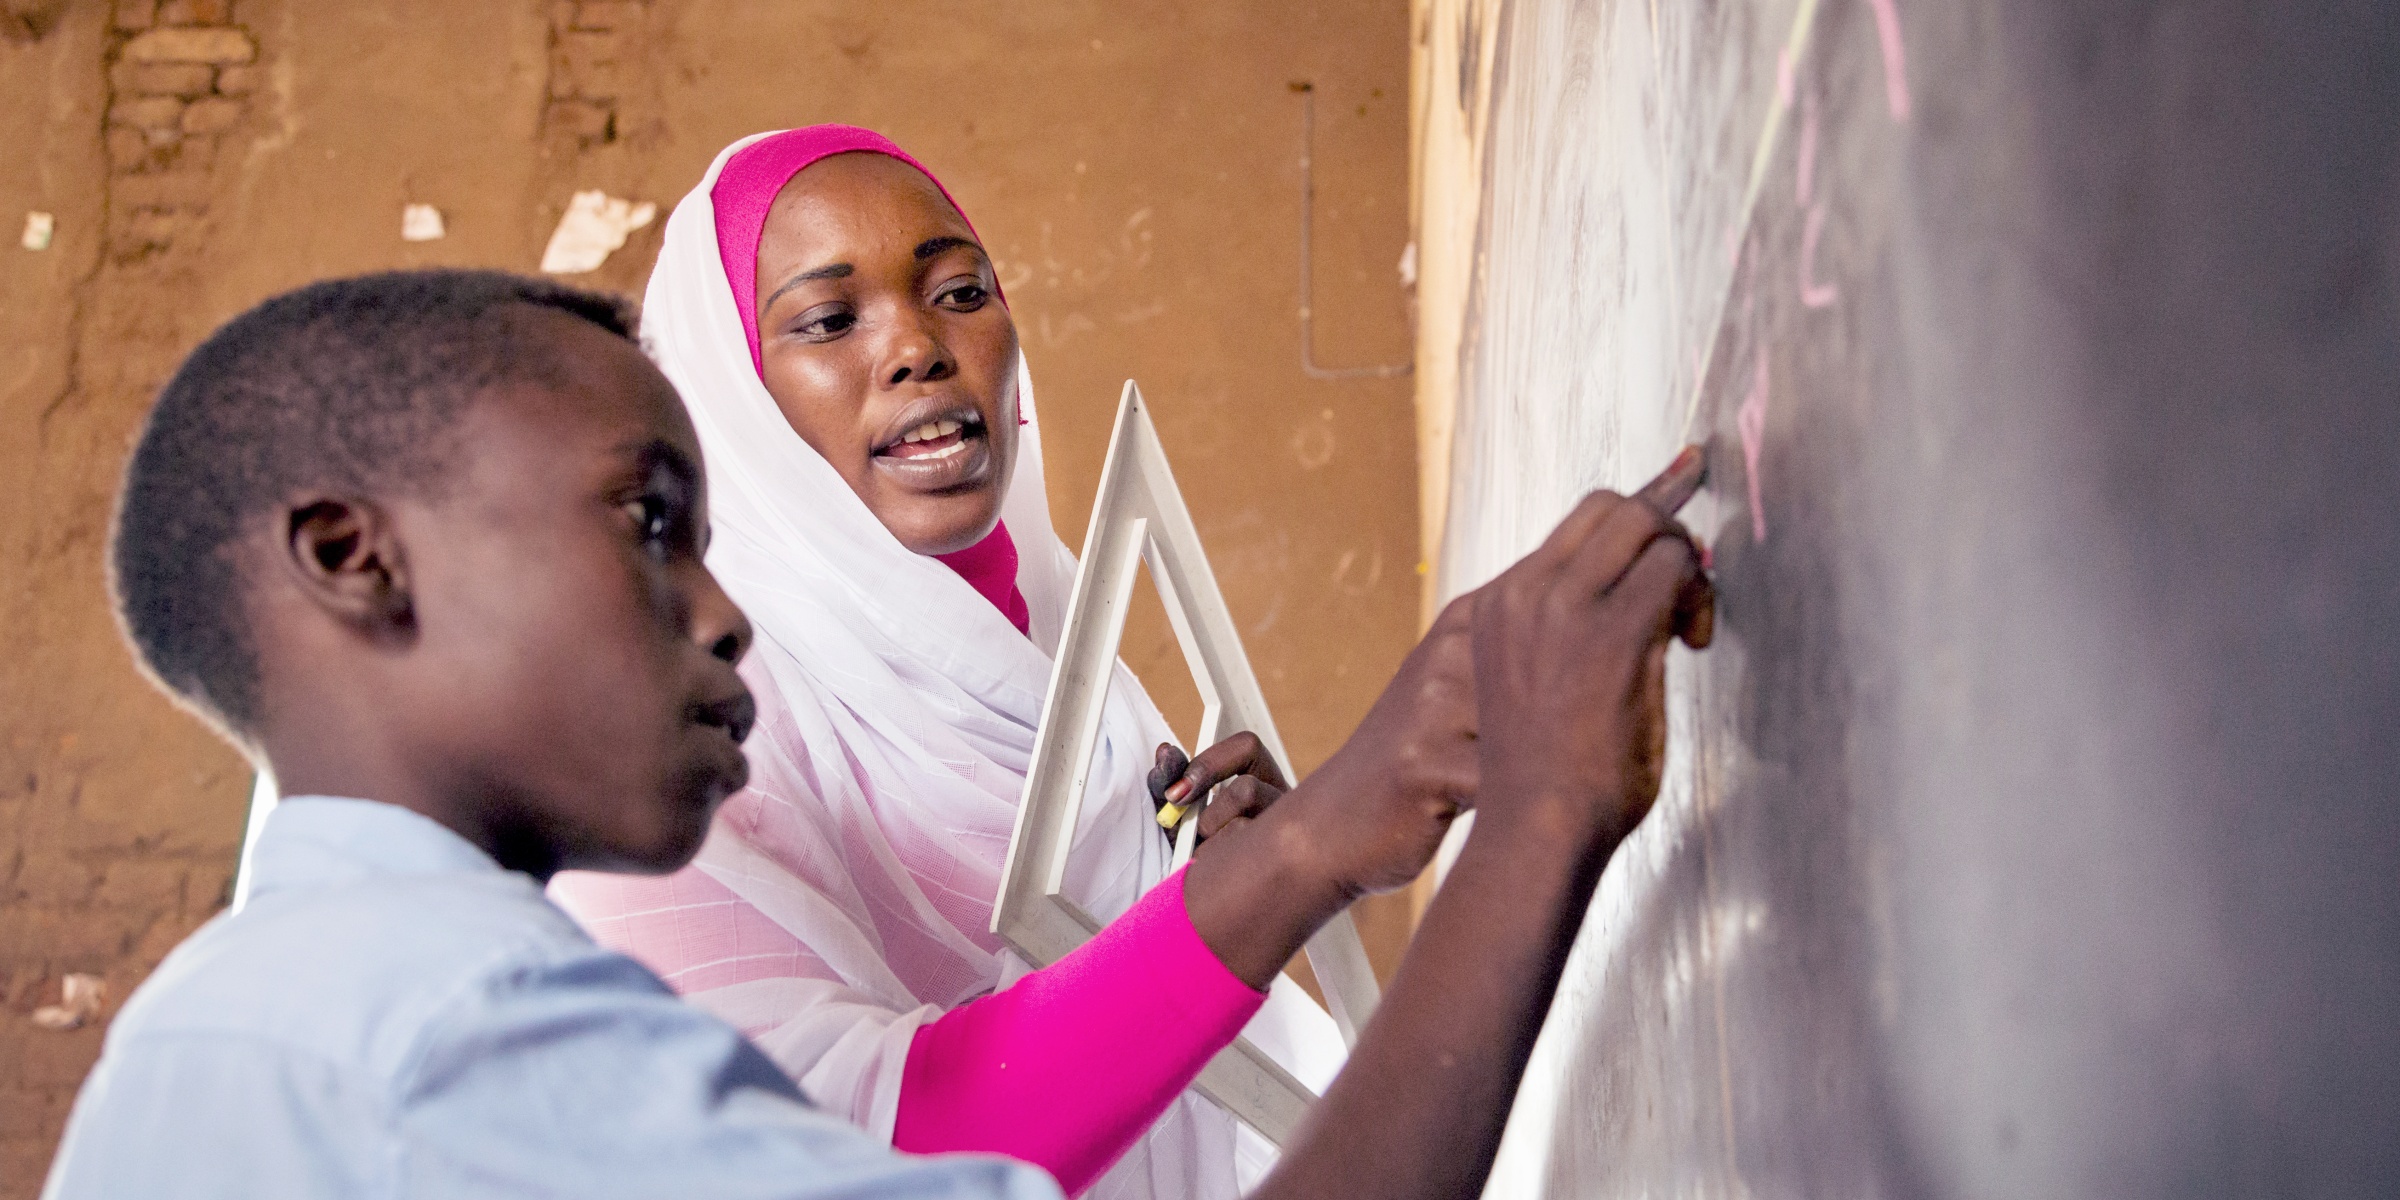 Sudan: Building the foundation for a strong education system (GPE)